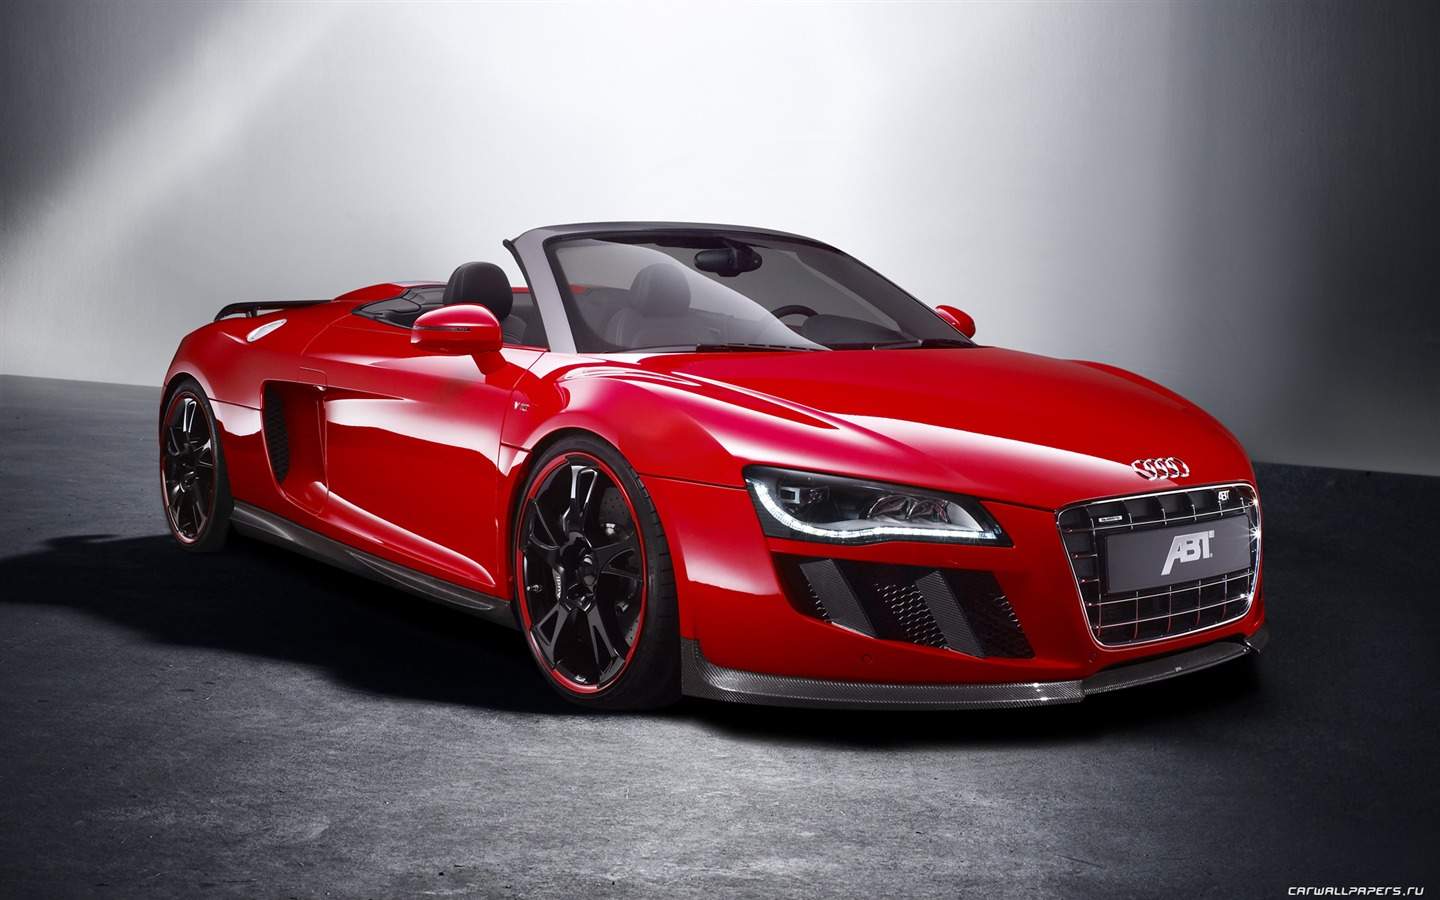 Red Audi R8 Wallpaper 6450 Hd Wallpapers in Cars   Imagescicom